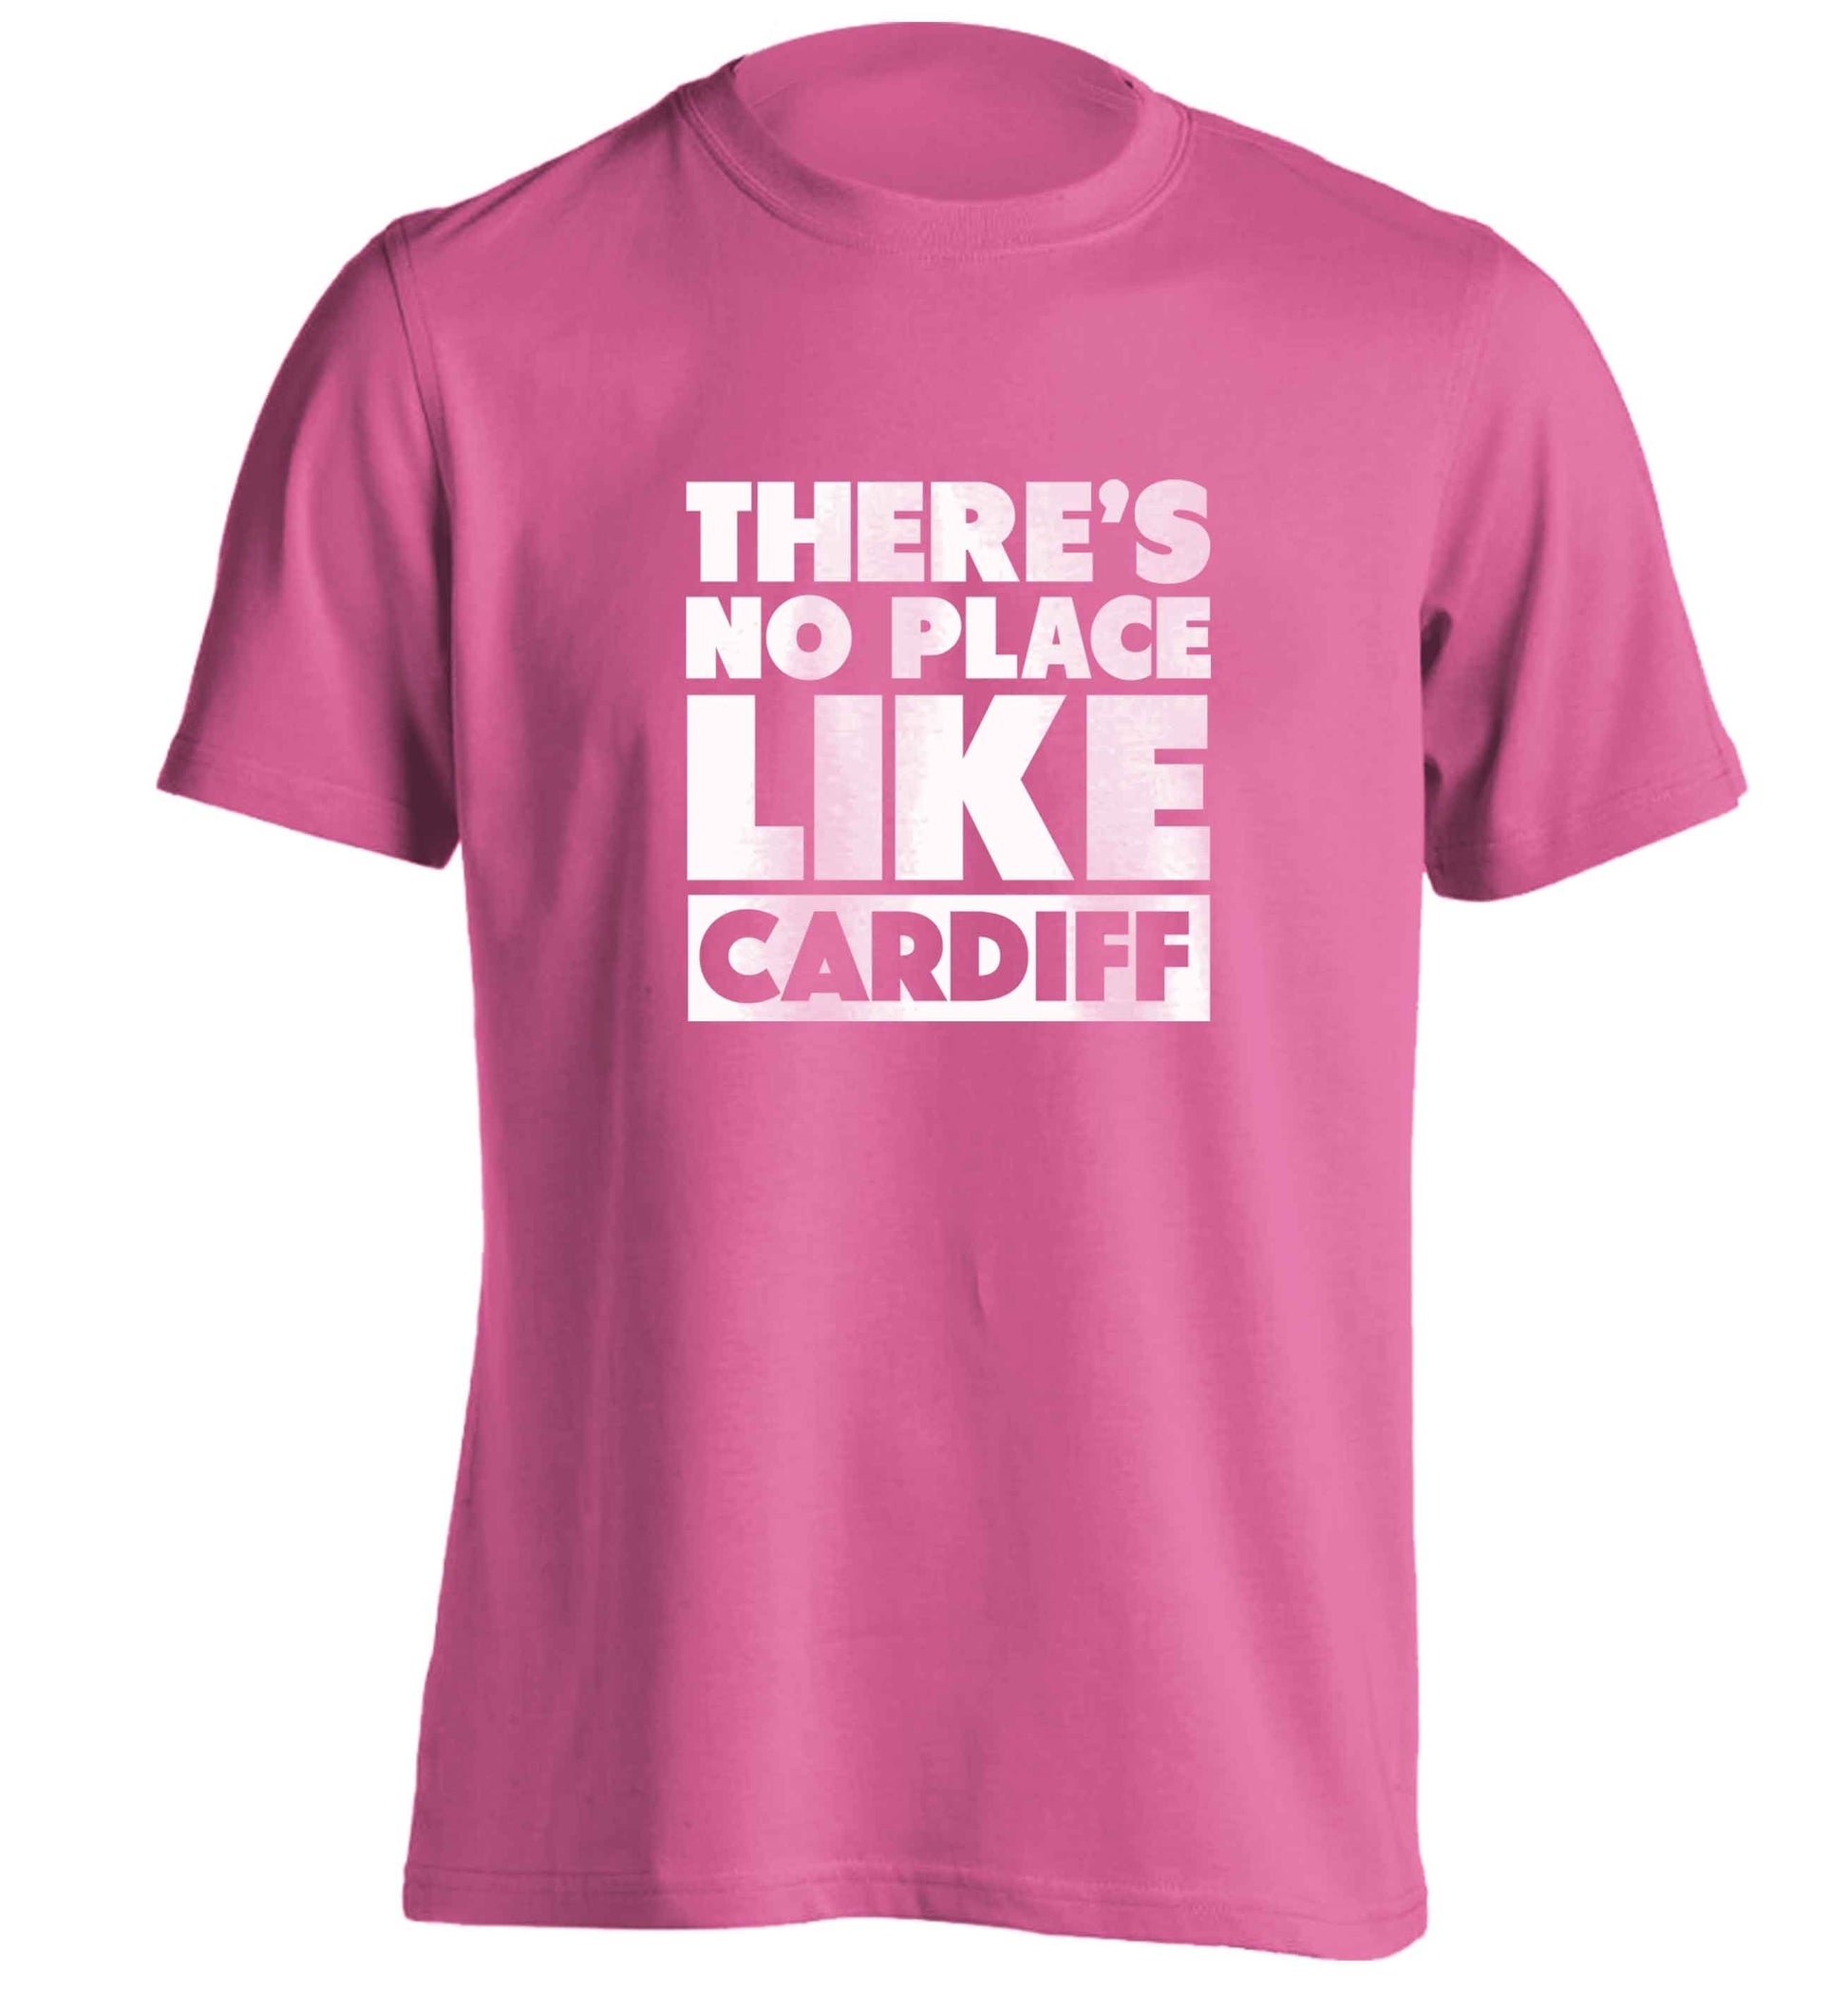 There's no place like Cardiff adults unisex pink Tshirt 2XL